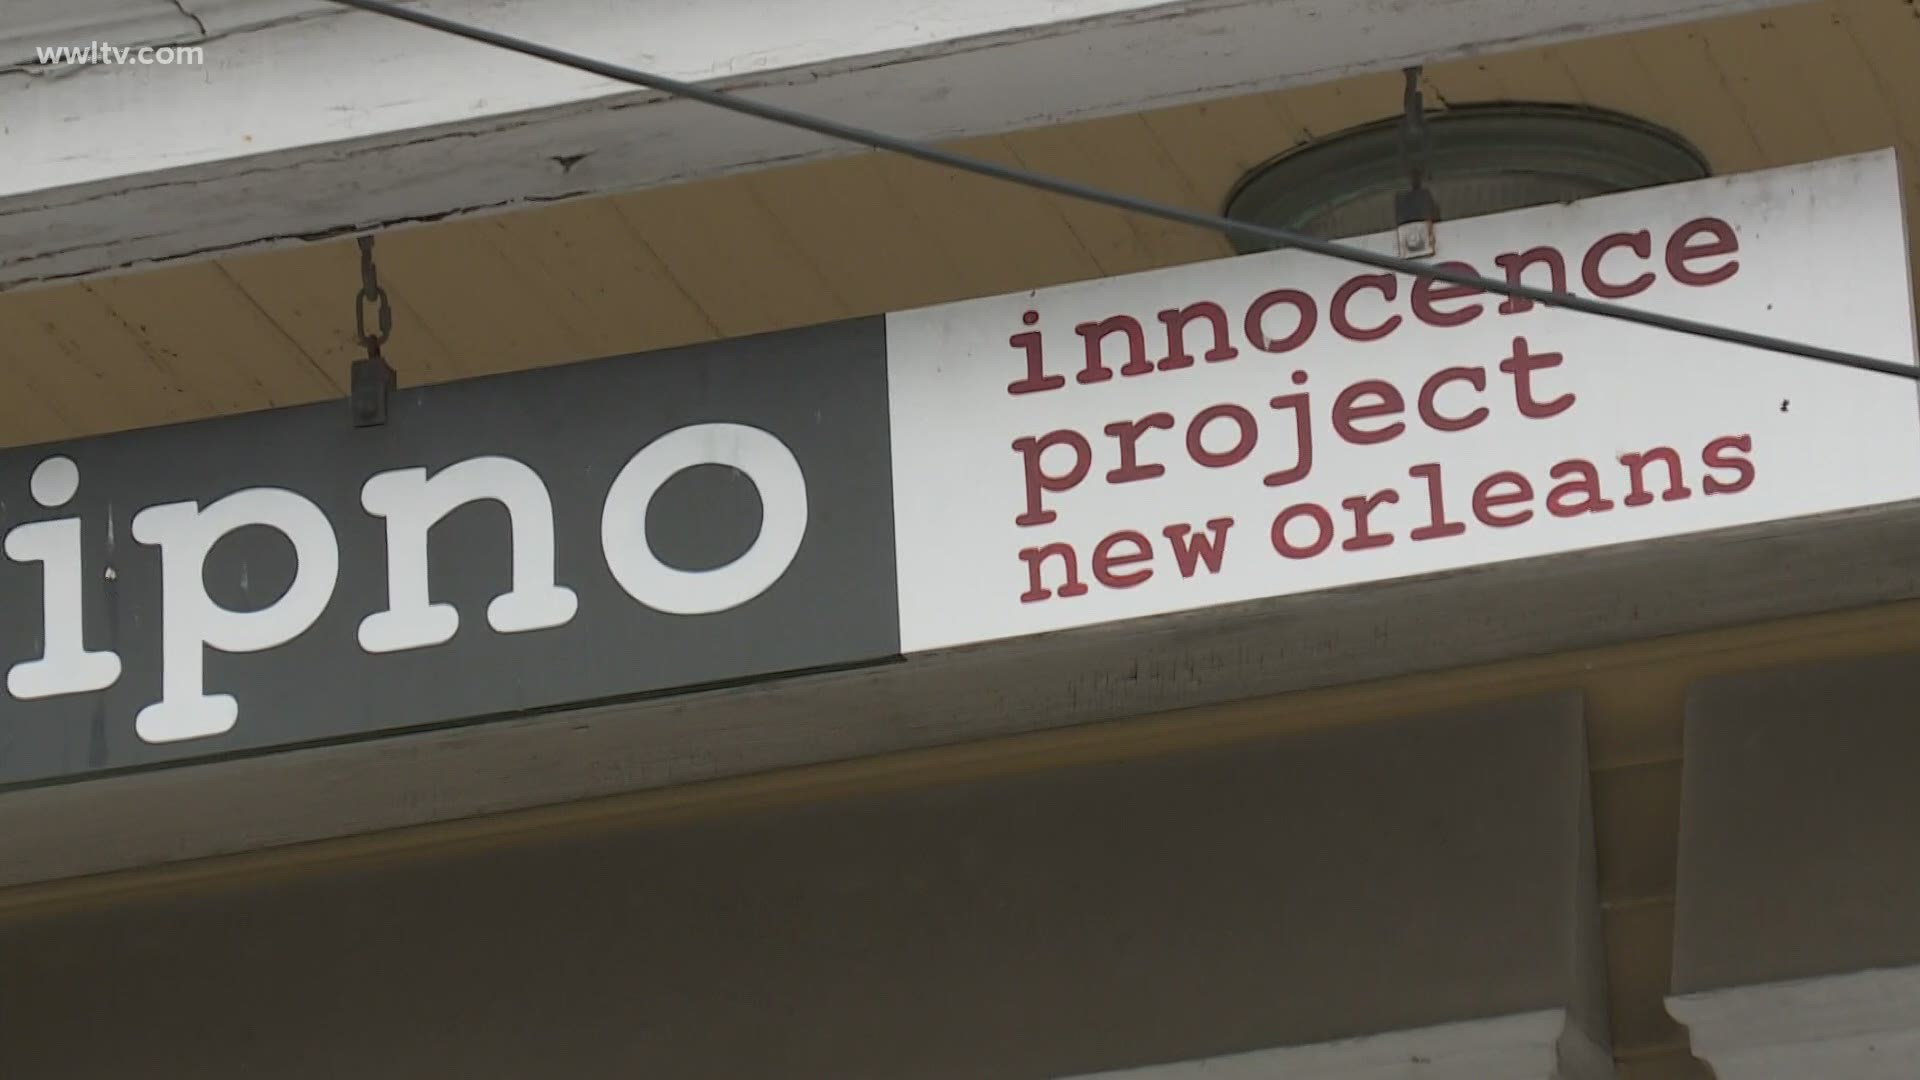 Mike Perlstein investigates the Innocence Project New Orleans as they help a convicted man reclaim his innocence.